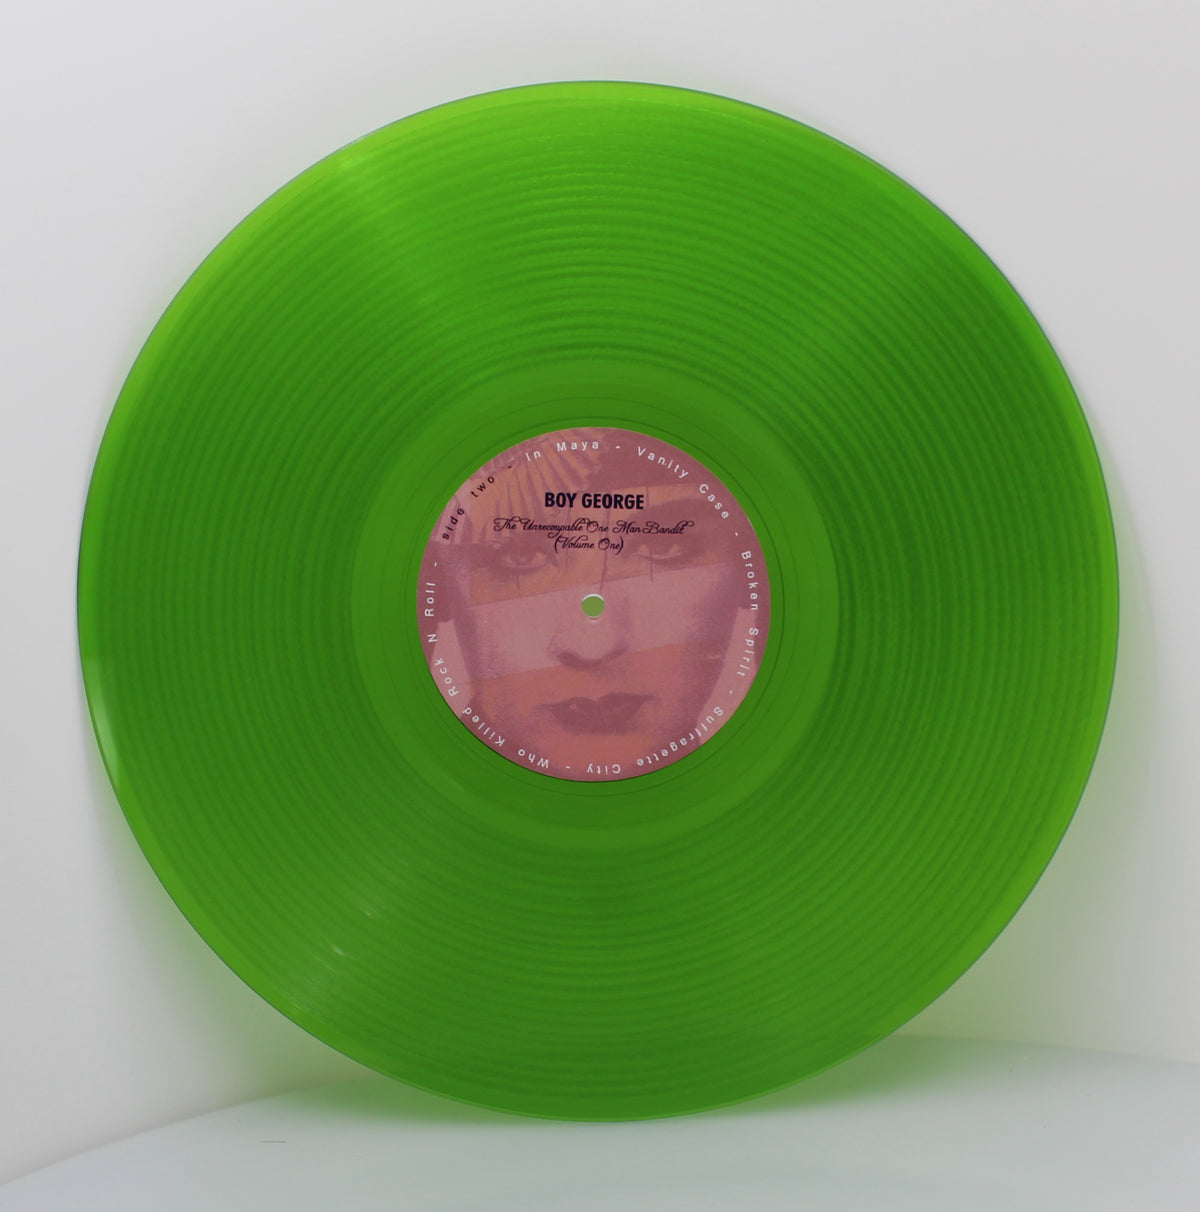 Boy George – The Unrecoupable One Man Bandit, Vinyl, LP, Limited Edition, Numbered, Green Transparent, Germany 1998